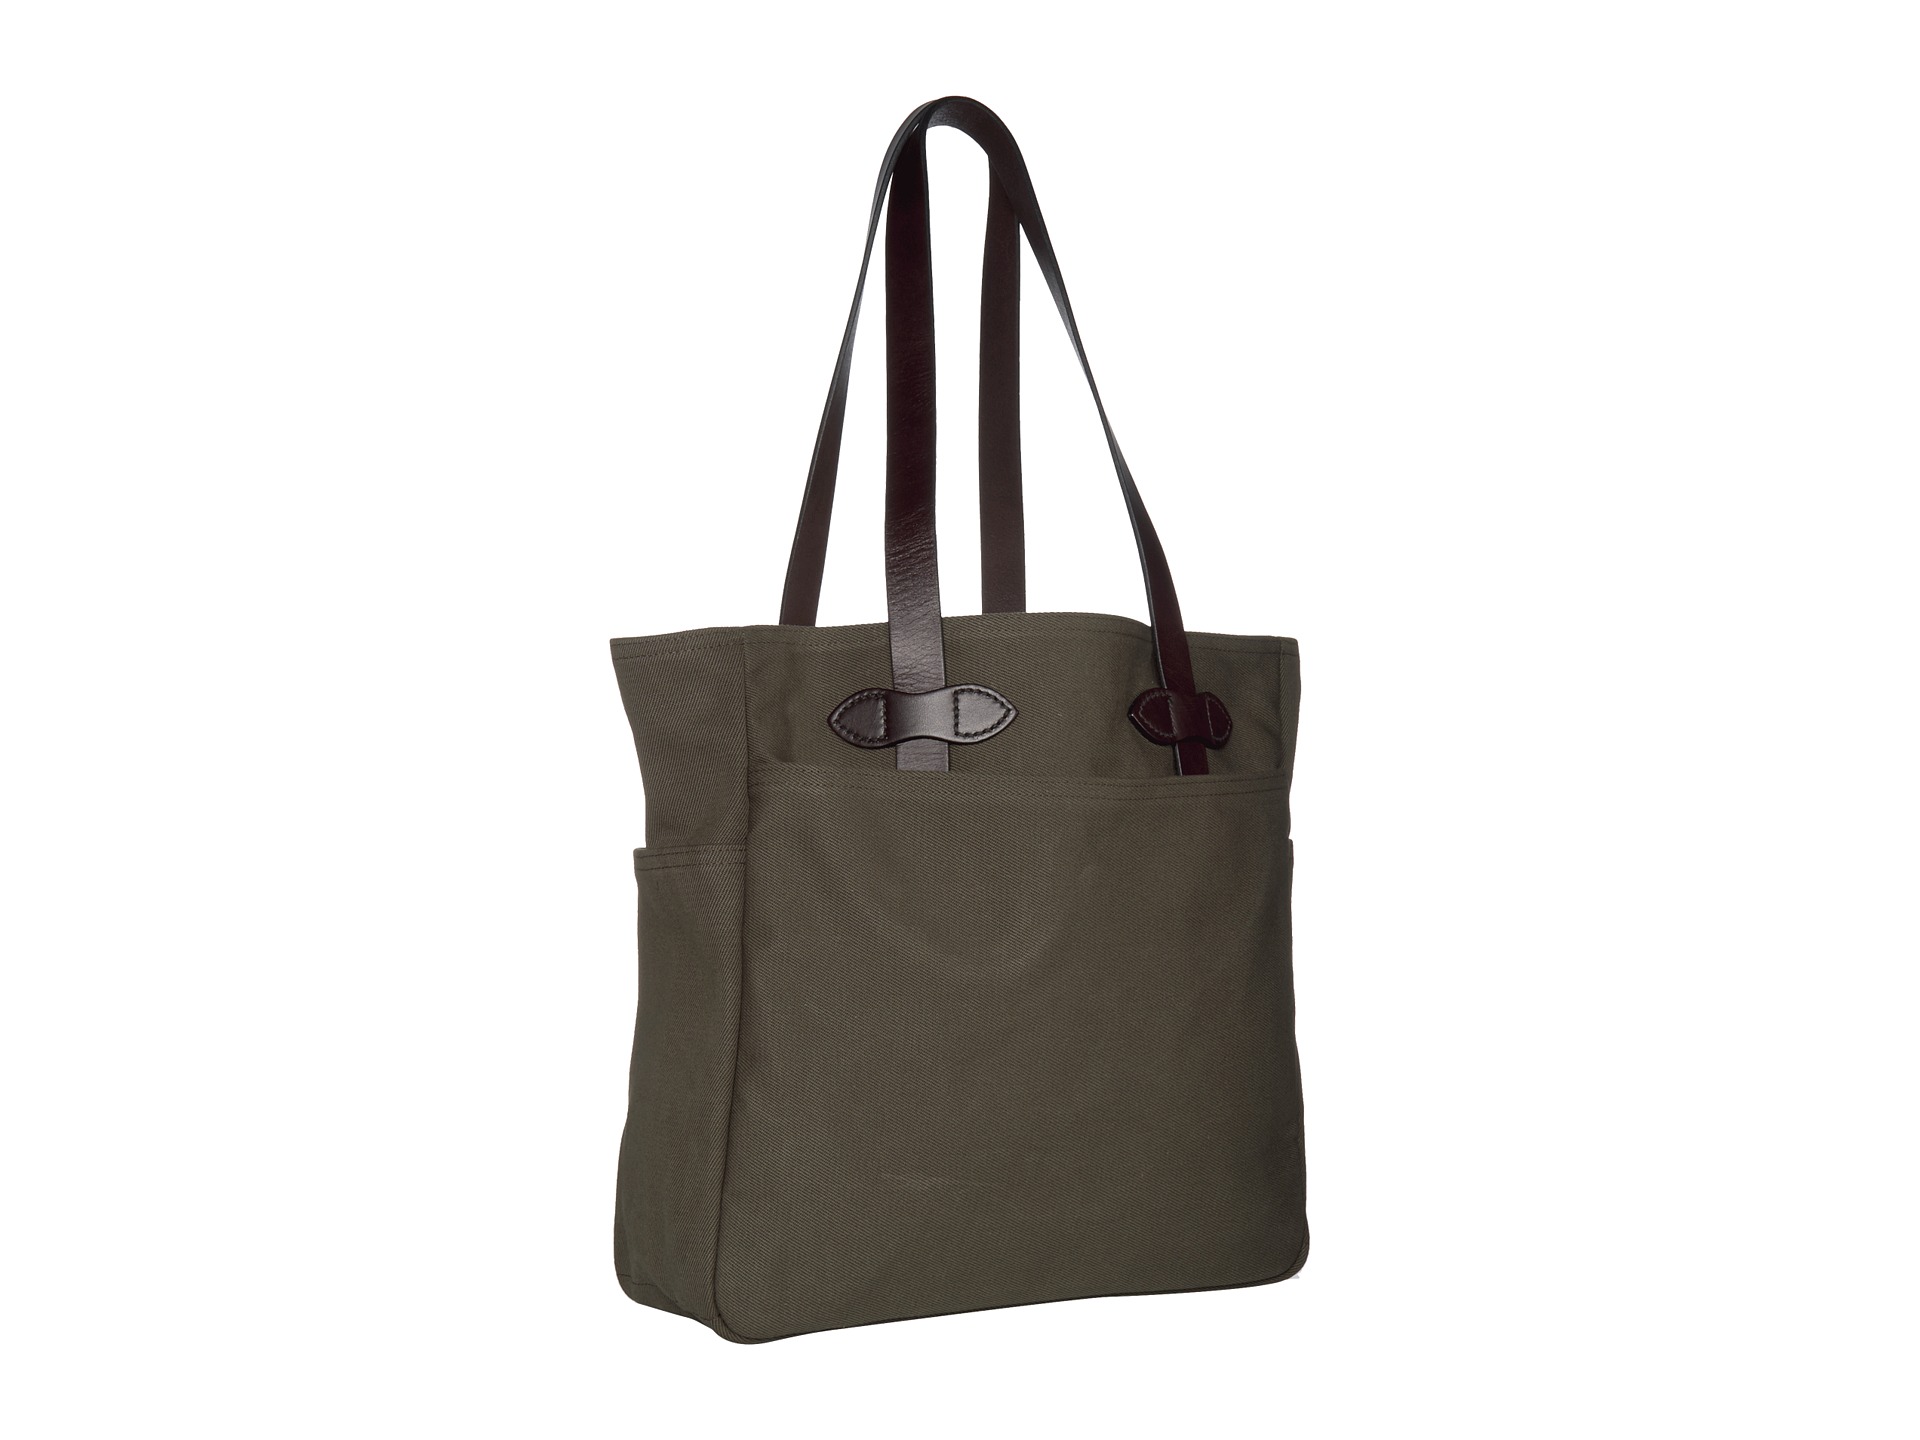 Filson Tote Bag W/Out Zipper at Zappos.com